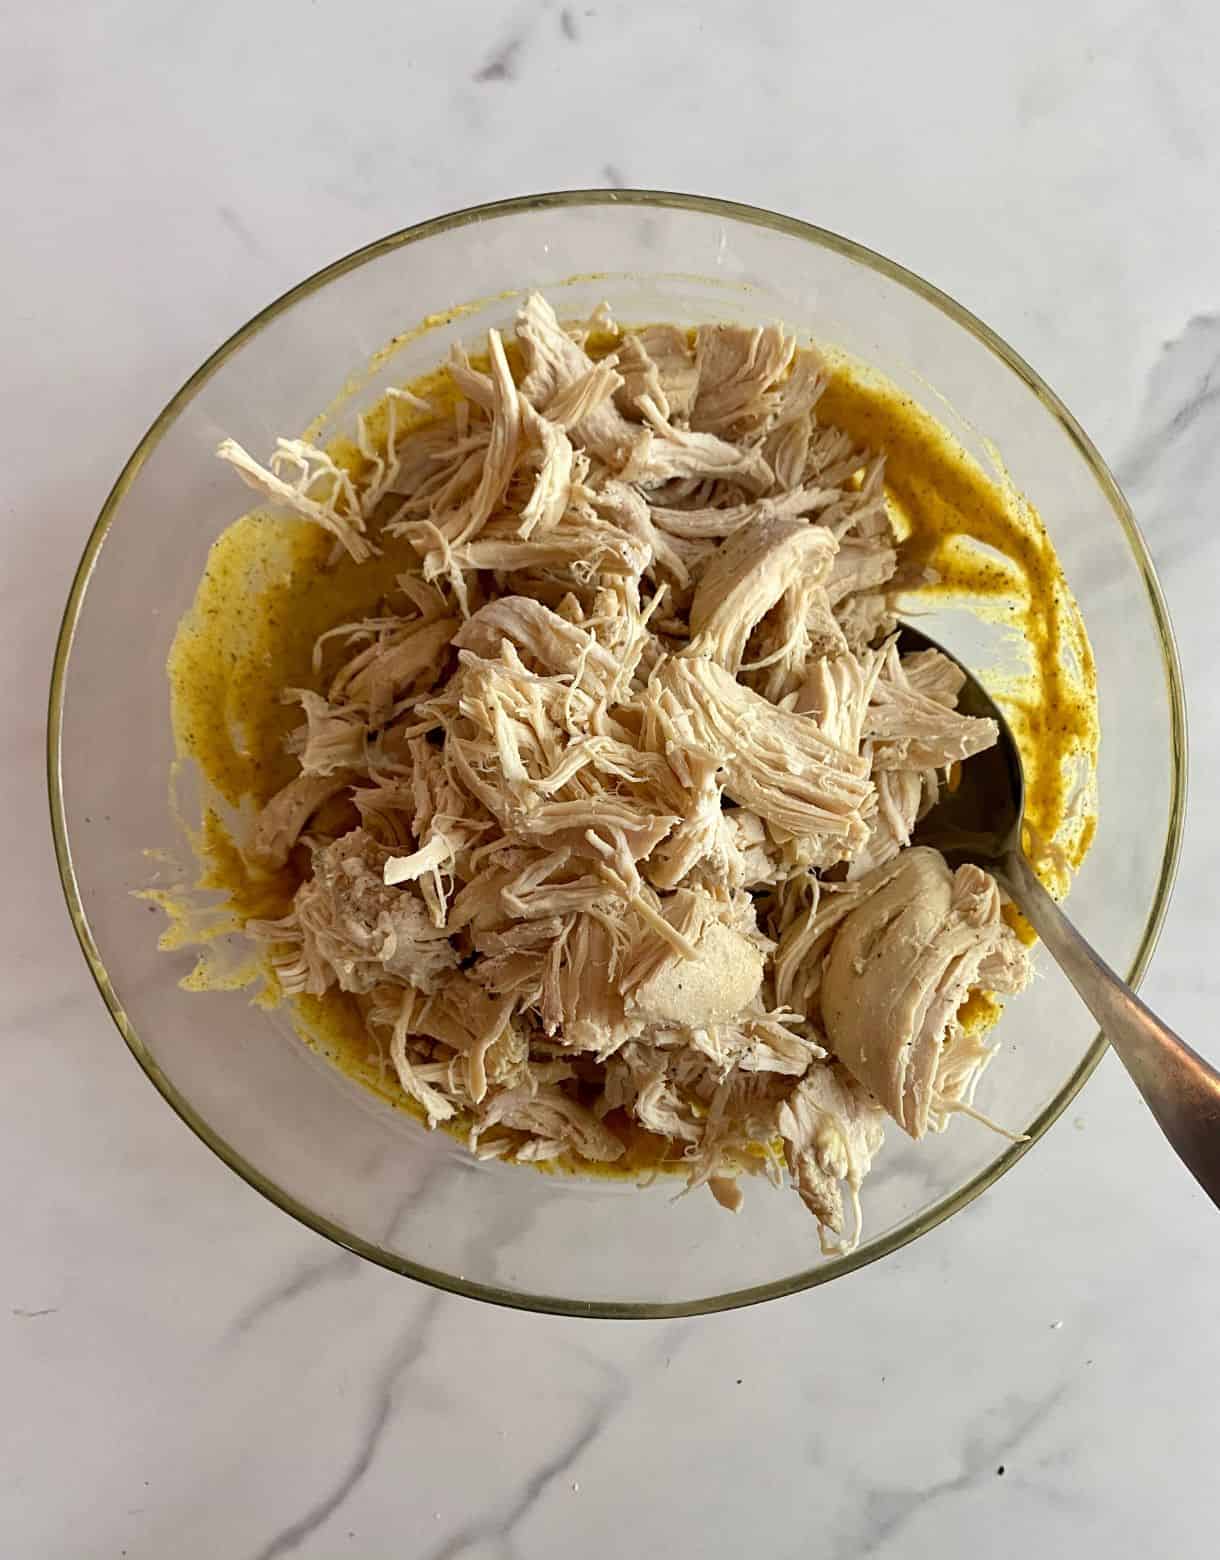 A bowl of curry dressing with shredded chicken added but not yet stirred.